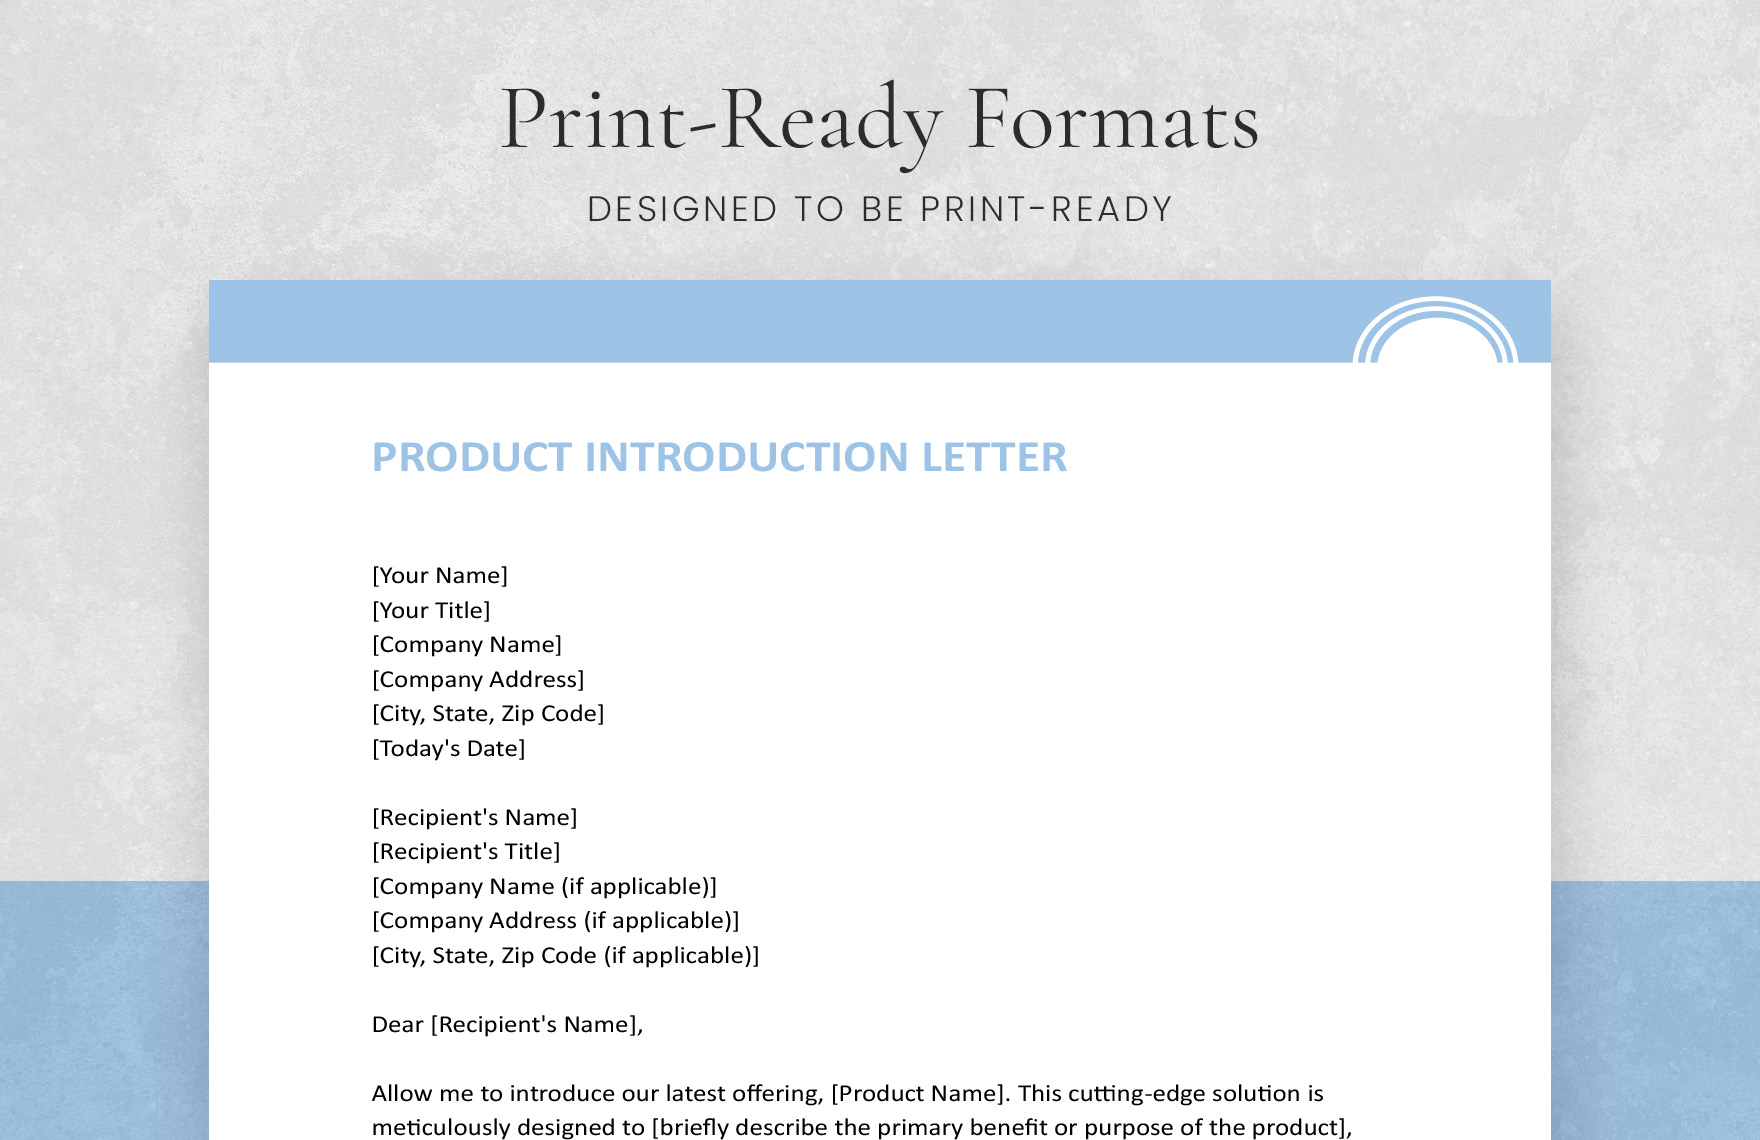 Product Introduction Letter